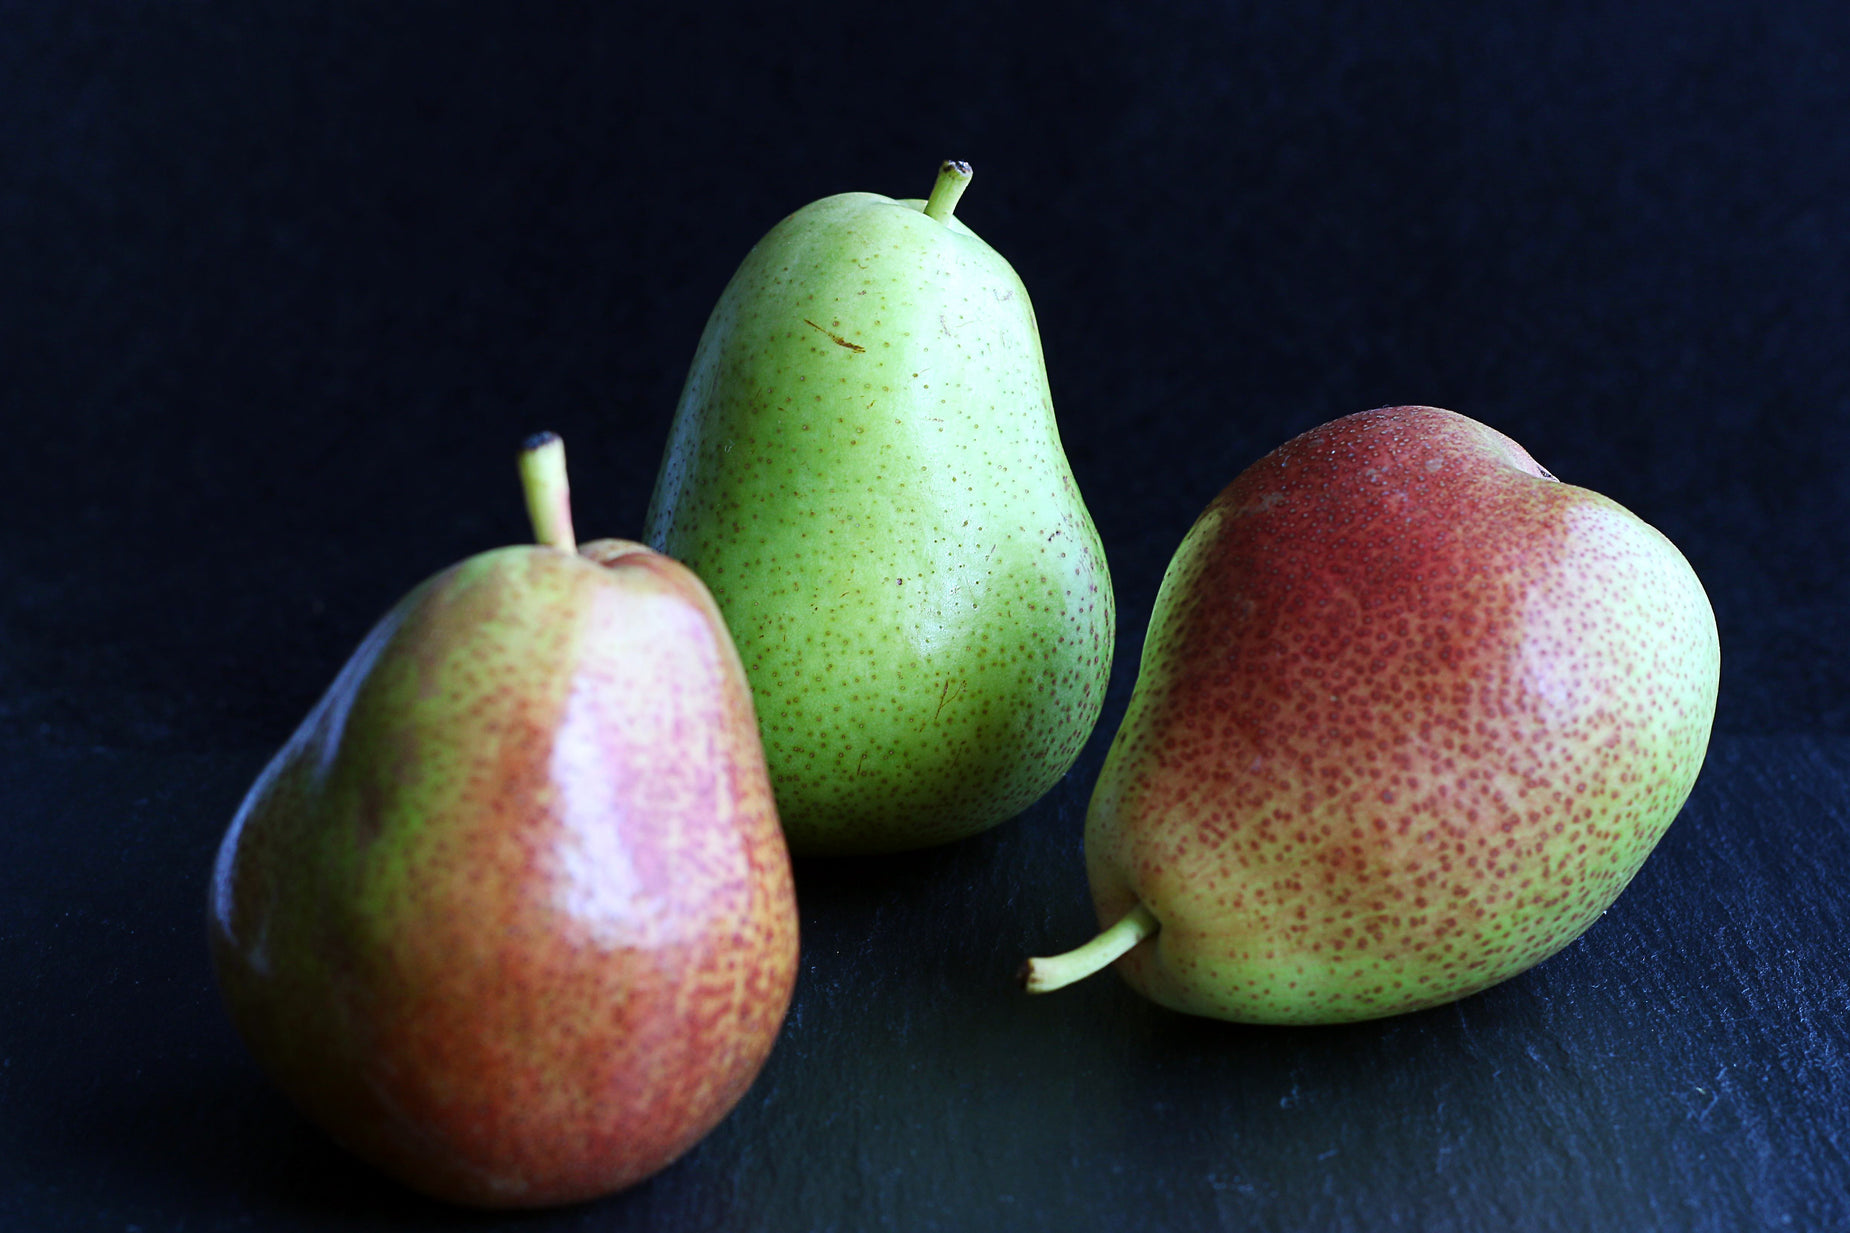 three green pears and one red pear are on a table